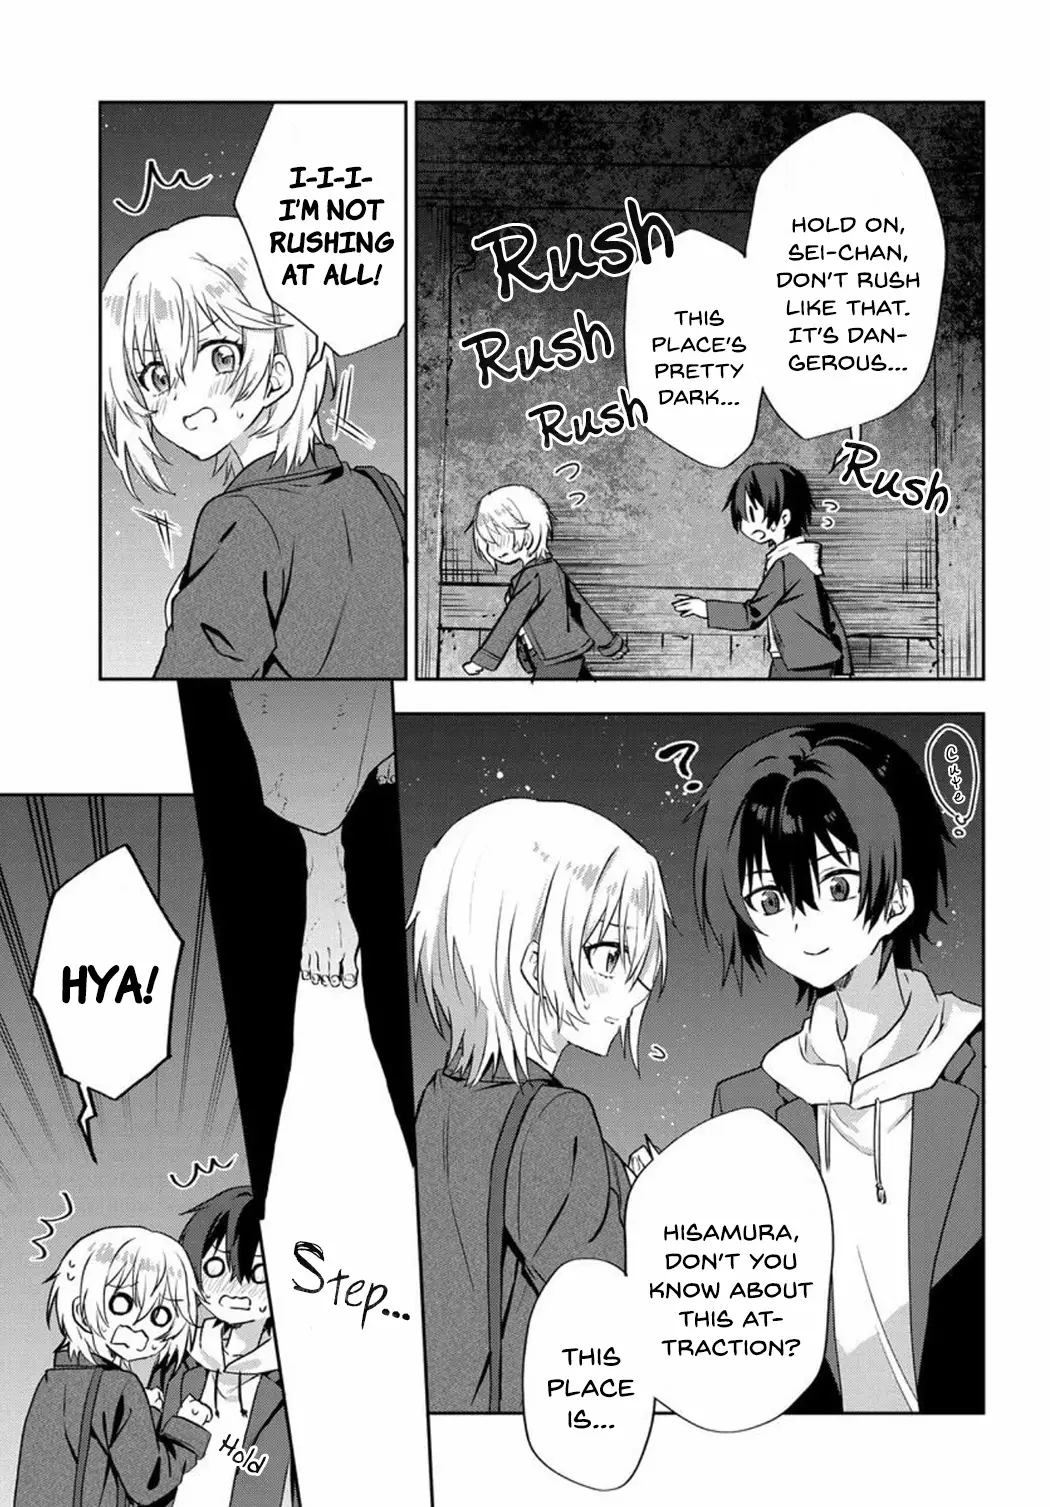 Since I’Ve Entered The World Of Romantic Comedy Manga, I’Ll Do My Best To Make The Losing Heroine Happy - 7.2 page 8-0c3603d0